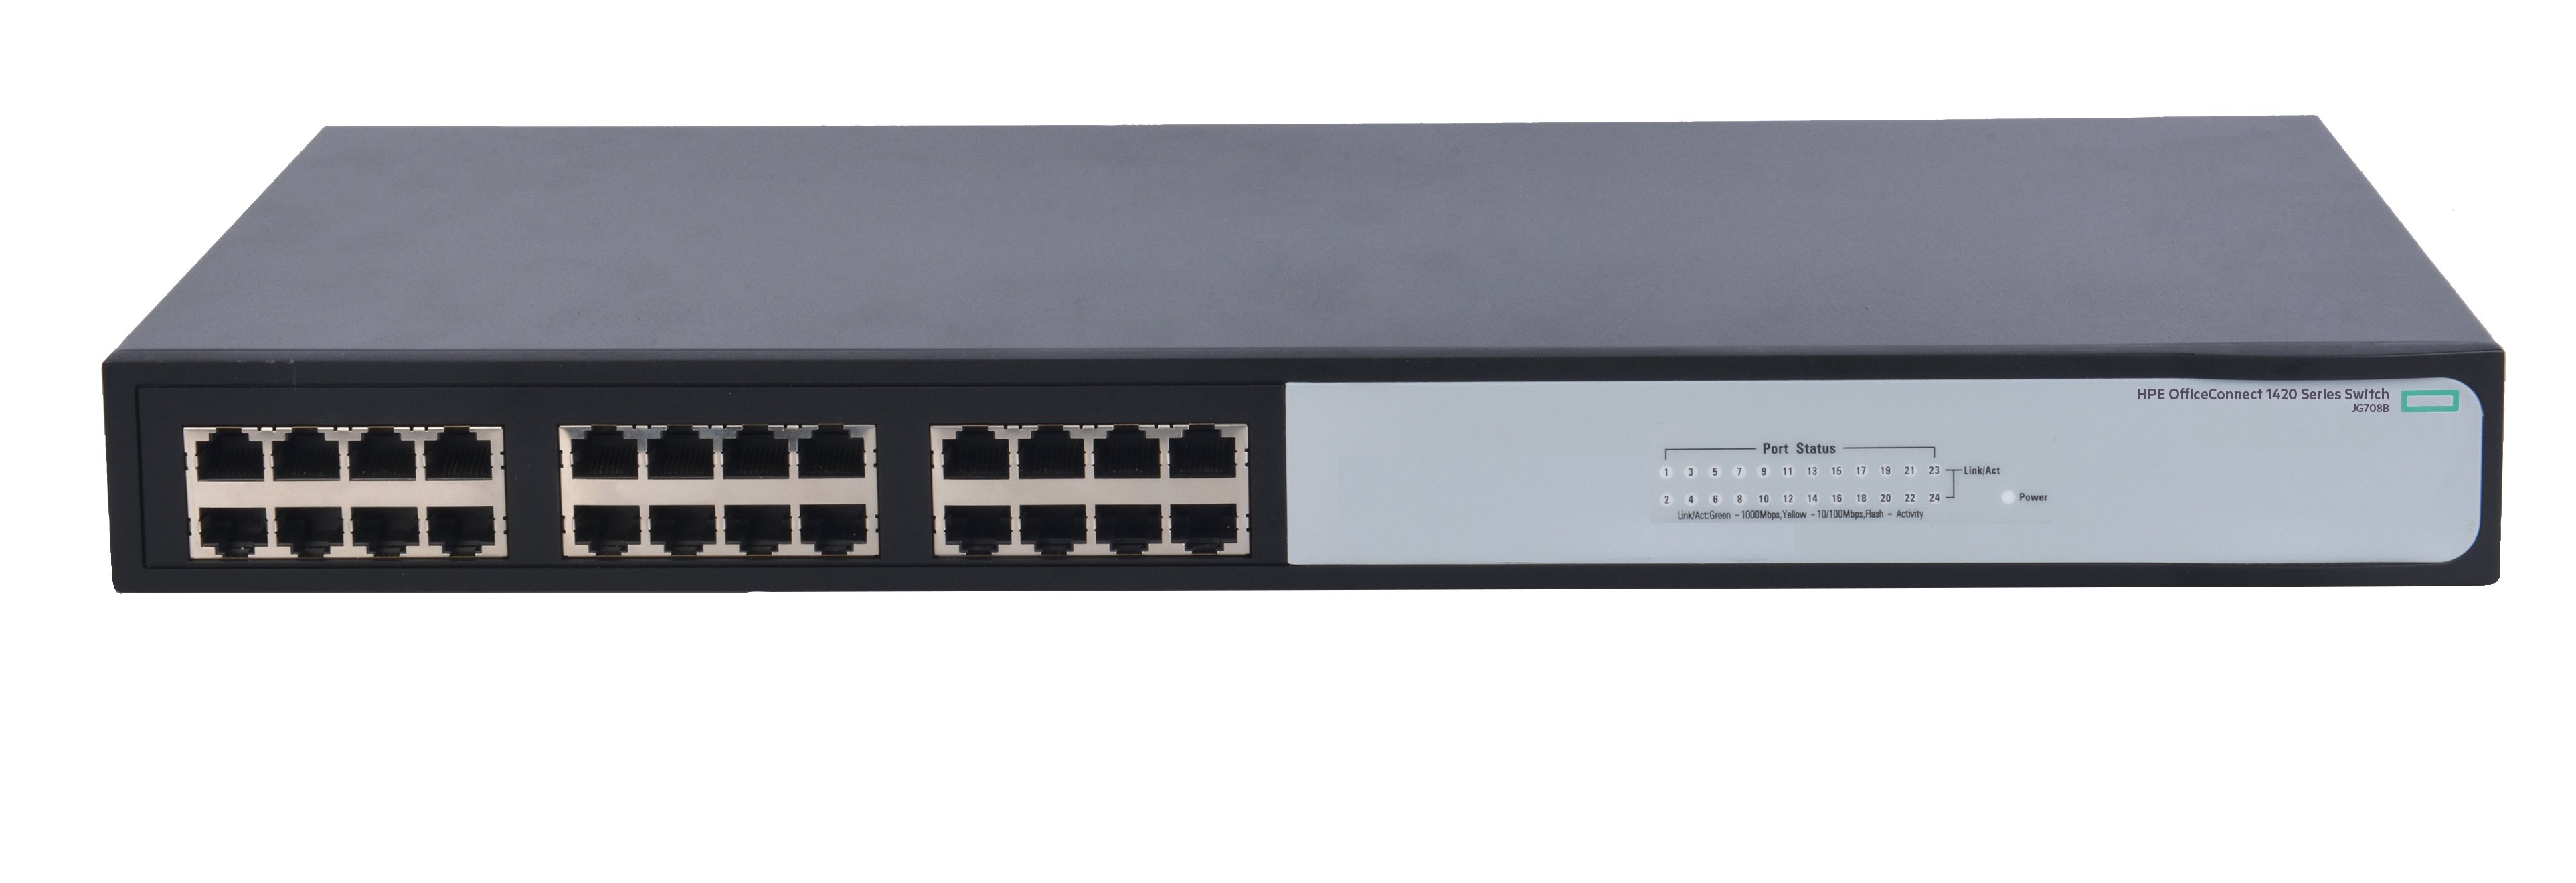 HPE OFFICECONNECT 1420 24G SWITCH [JG708B]